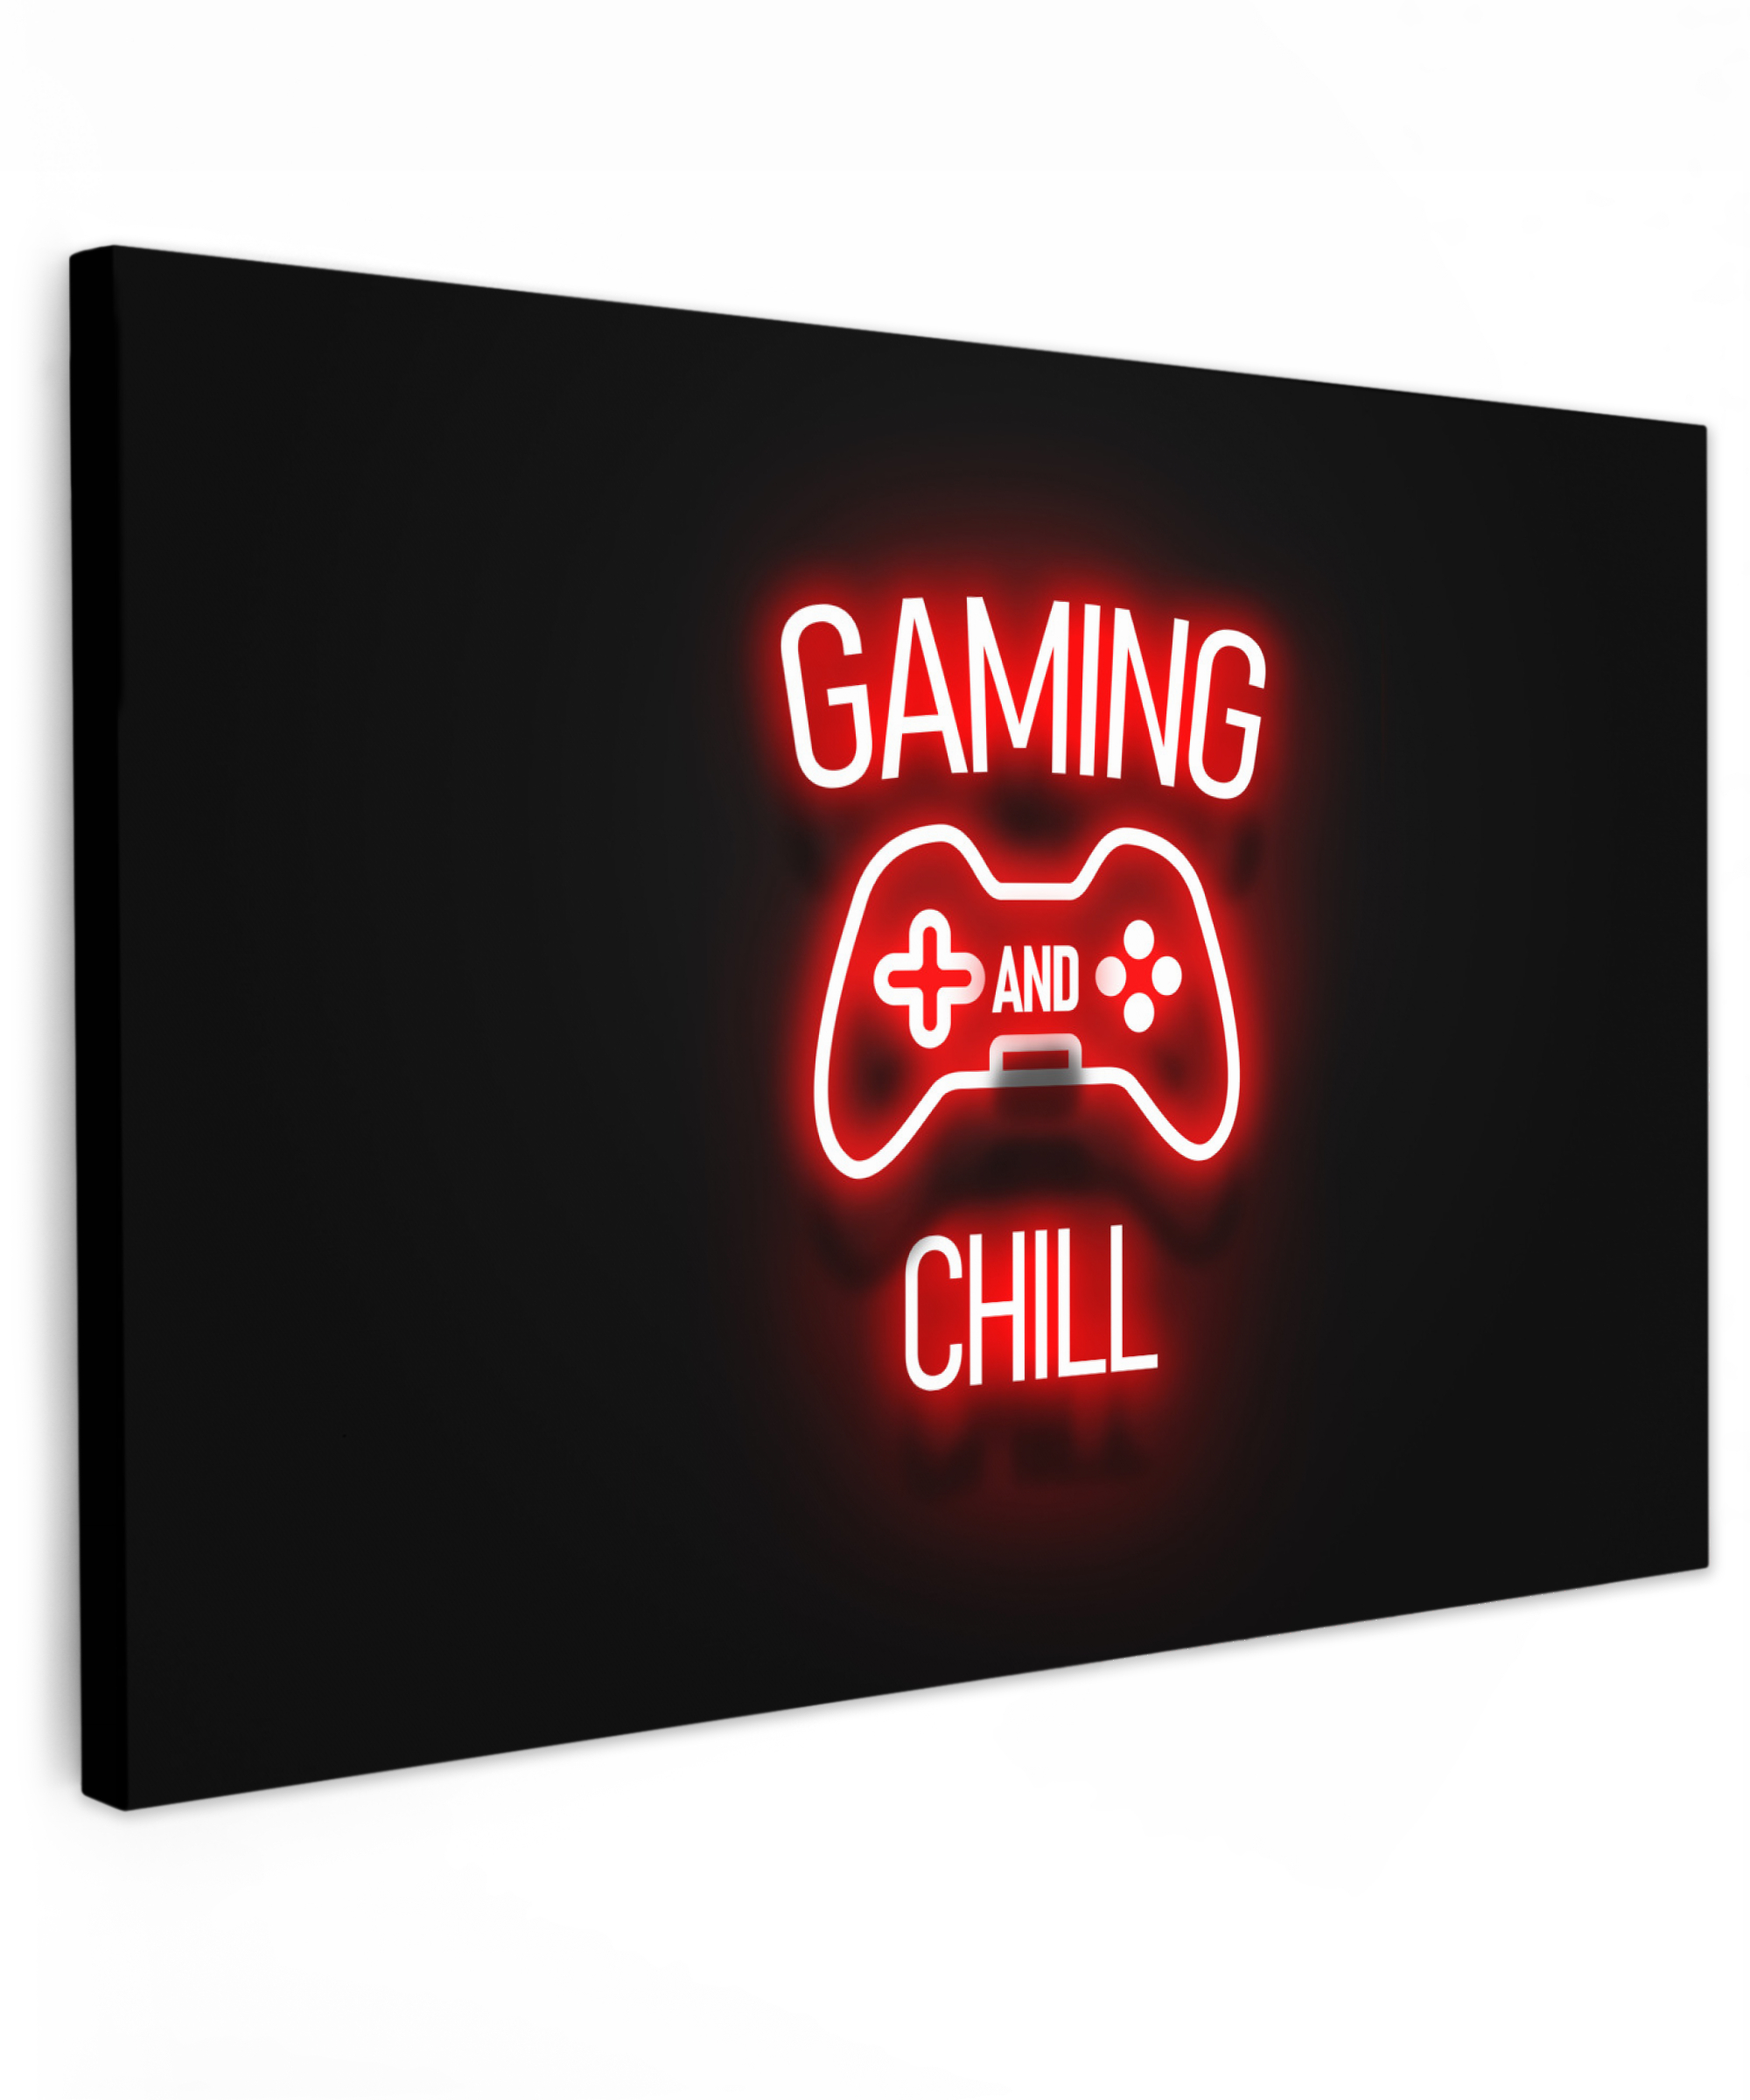 Canvas schilderij - Gaming - Quotes - Gaming and chill - Neon - Rood